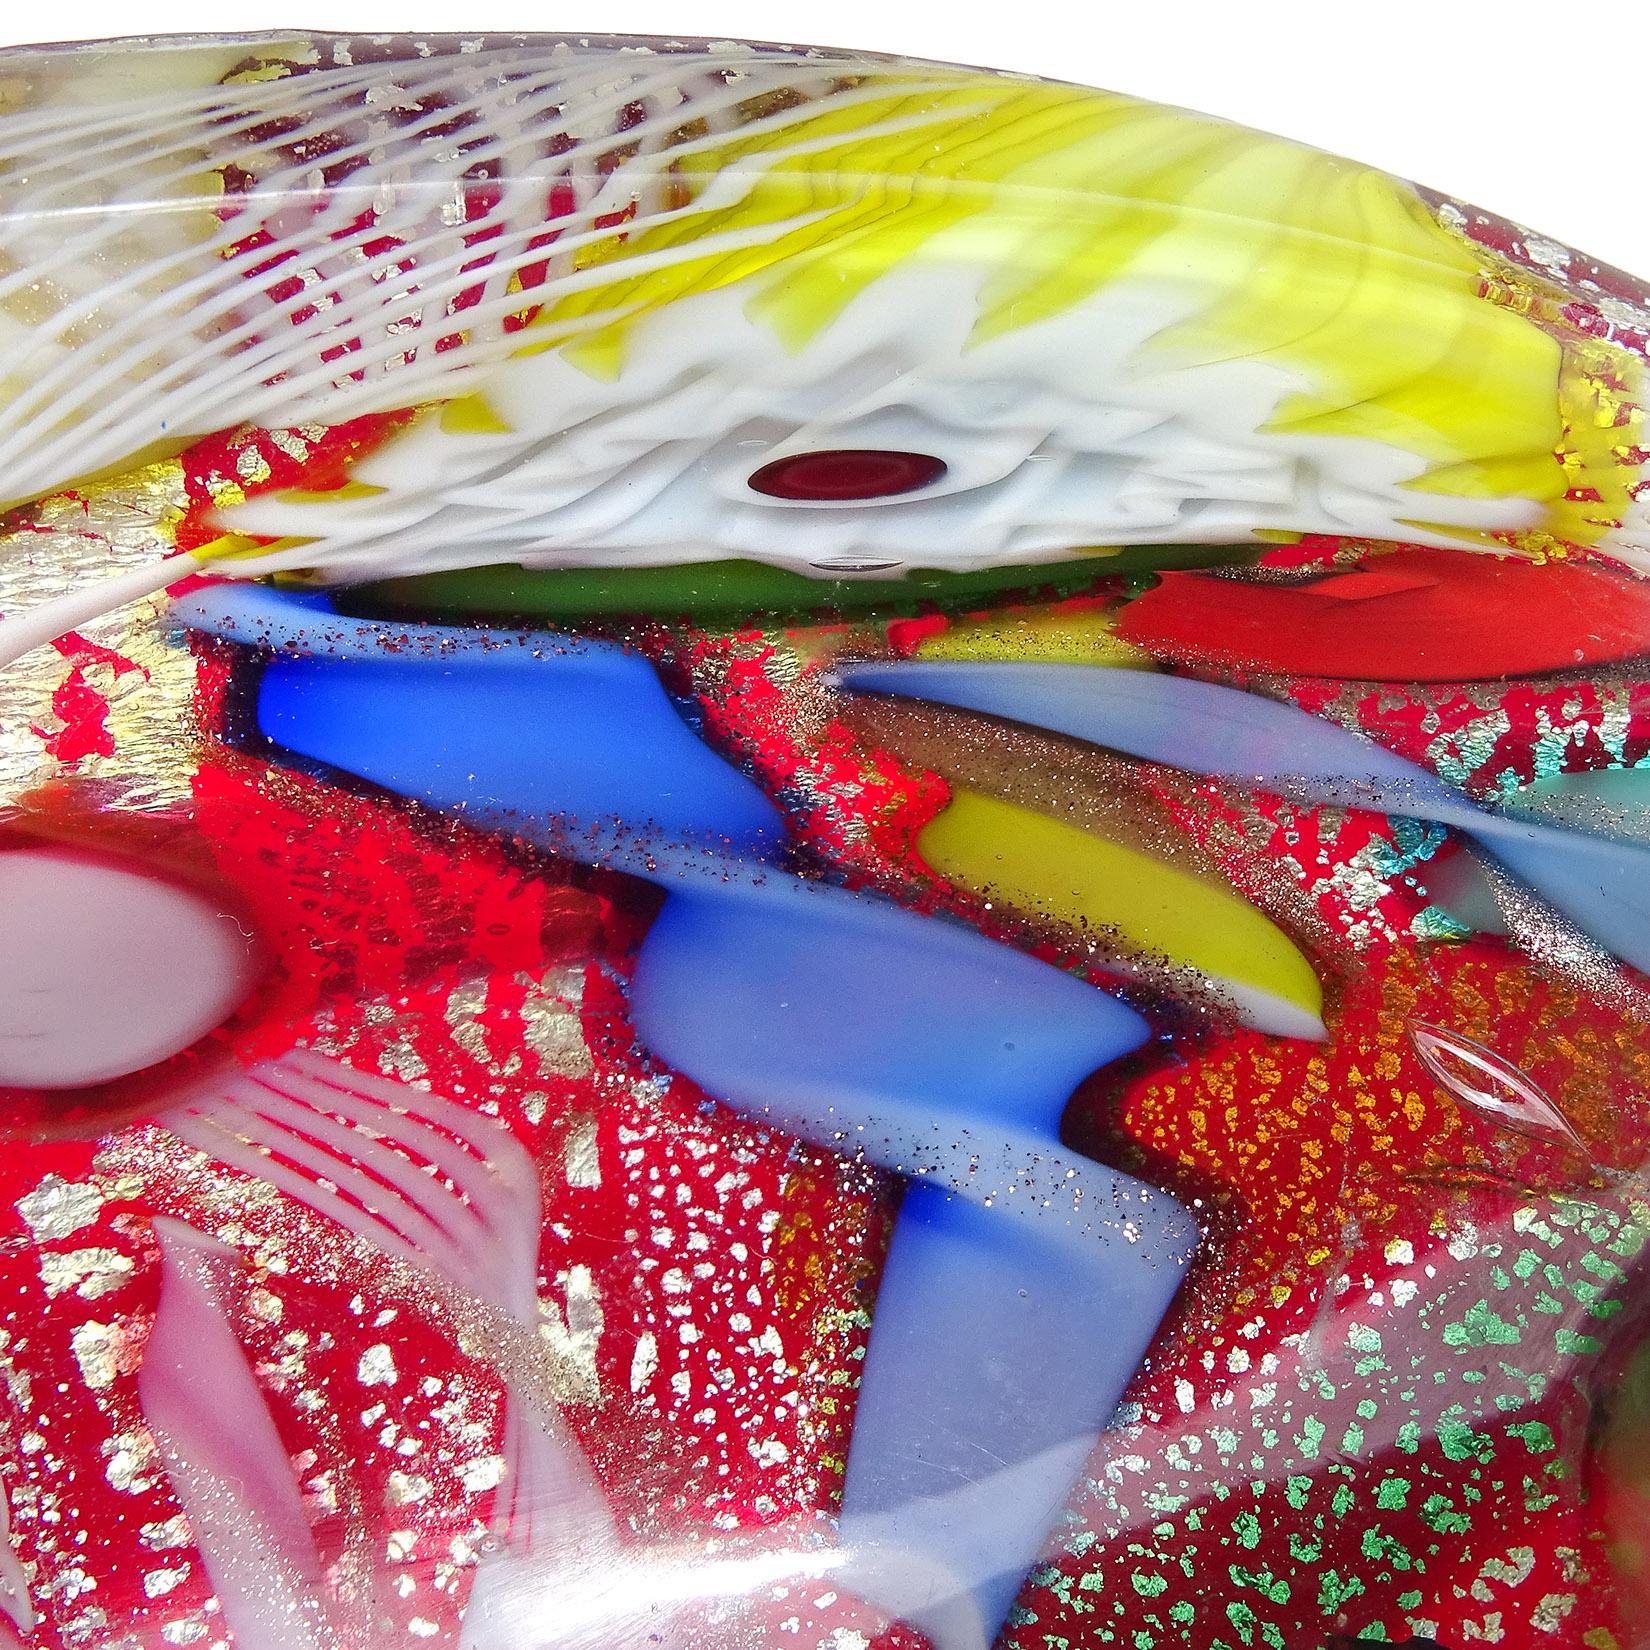 Hand-Crafted A.Ve.M. Murano Red Millefiori Flower Canes Silver Flecks Italian Art Glass Bowl For Sale